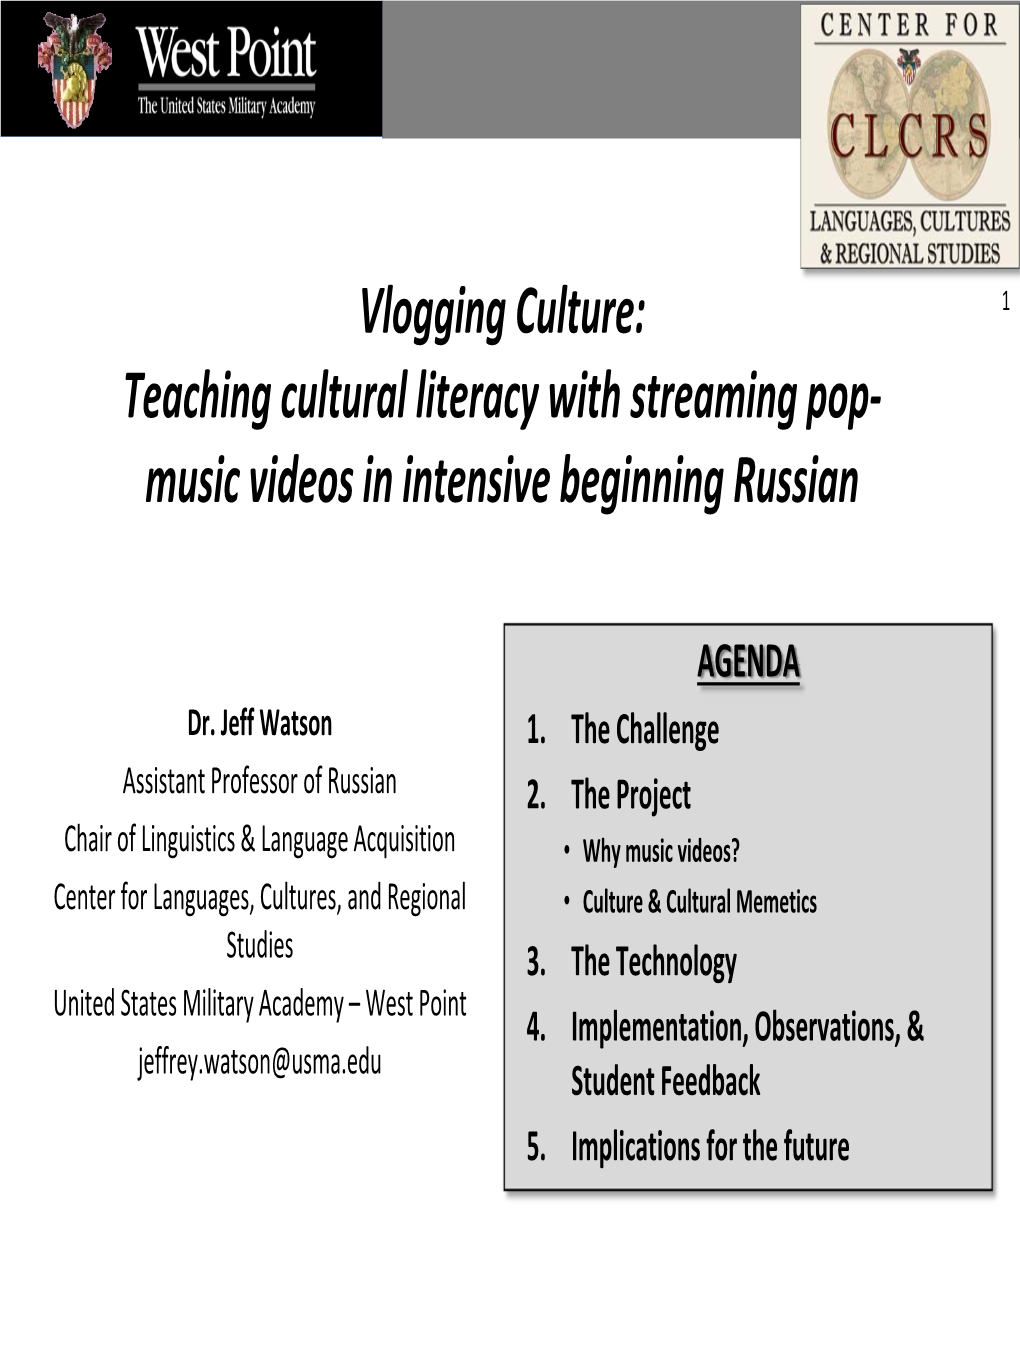 Vlogging Culture: Teaching Cultural Literacy with Streaming Pop-Music Videos in Intensive Beginning Russian: a Pilot Study